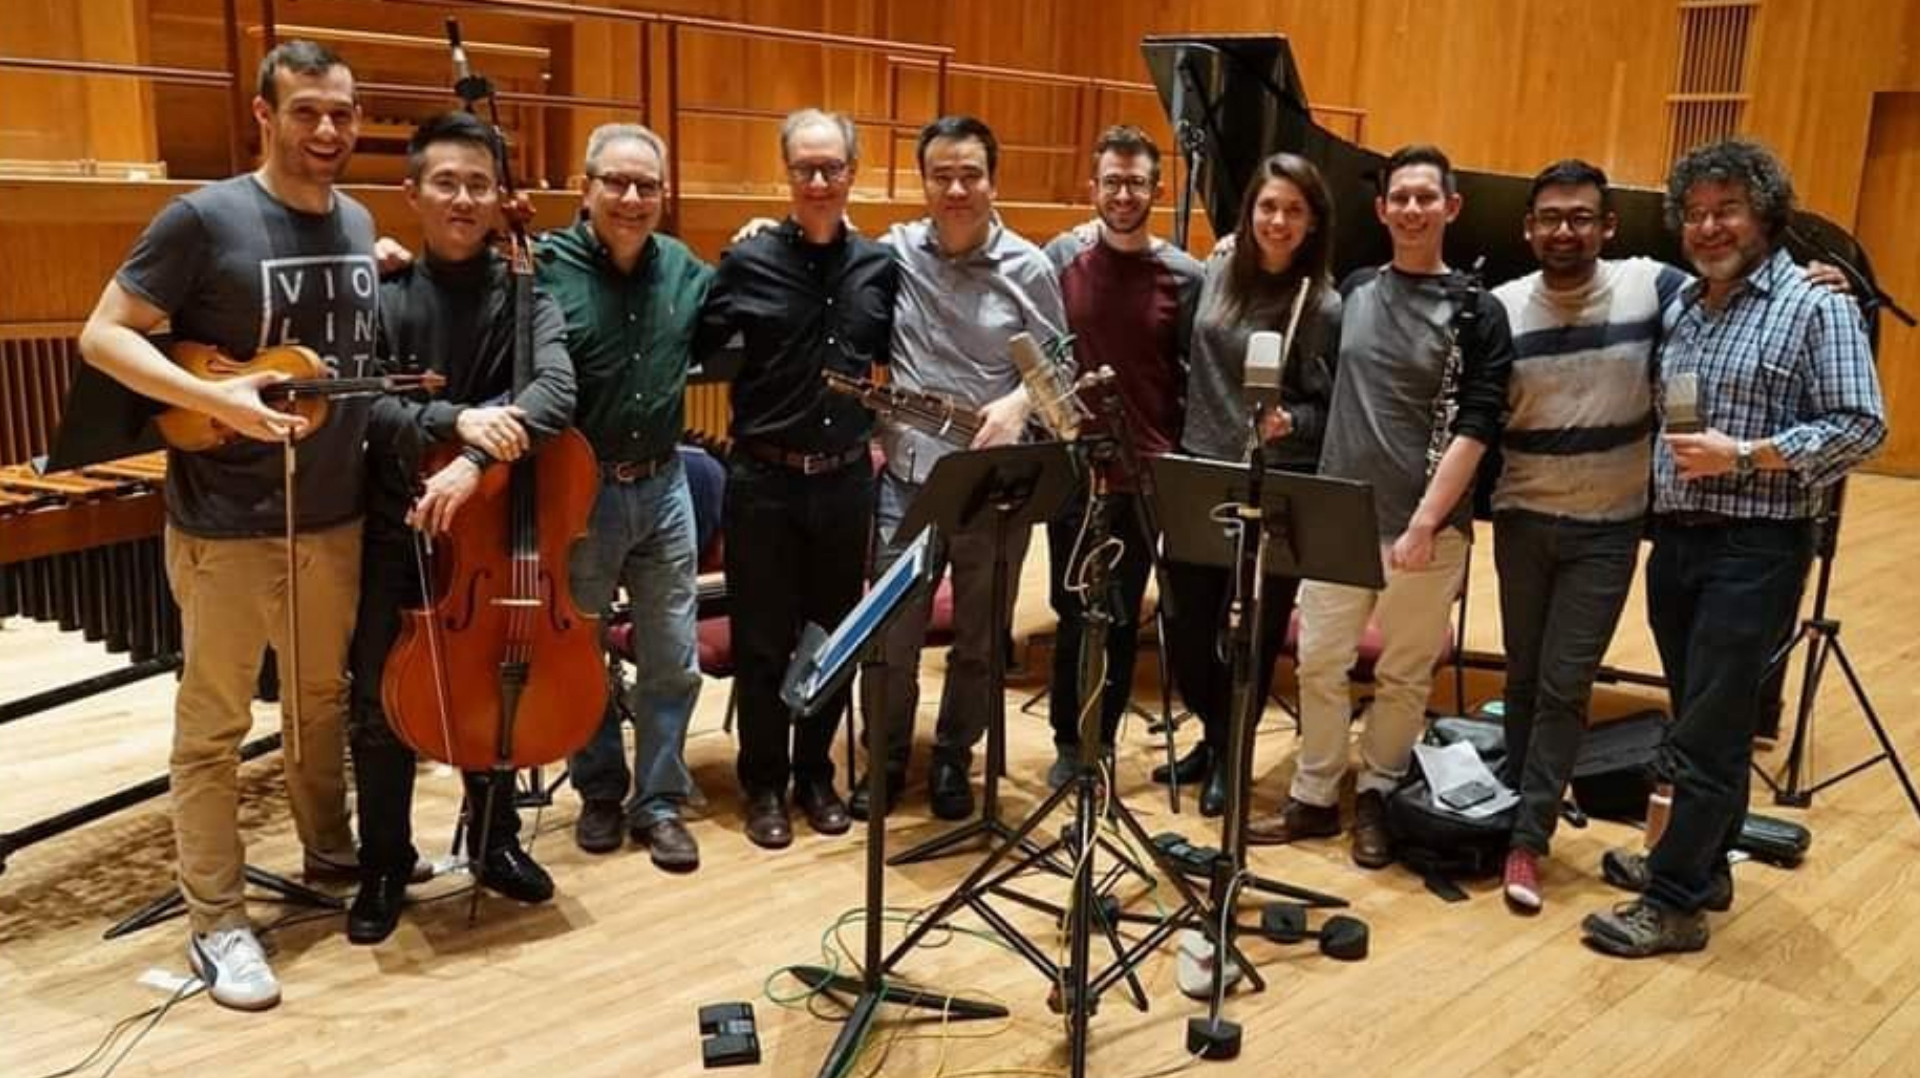 Members of chamber ensemble All of the Above pause for a photo during the recording of the ‘Double Portrait’ album. The group uncludes (from left) Scott Jackson, violin; Yijia Fang, cello; Edward Smaldone and Douglas Knehas, composers; Hu Jianging, sheng; Matthew Umphreys, piano; Nave Graham, flute; Mikey Arbulu, clarinet; David Abraham, percussion; and Adam Abeshouse, producer. Submitted photo